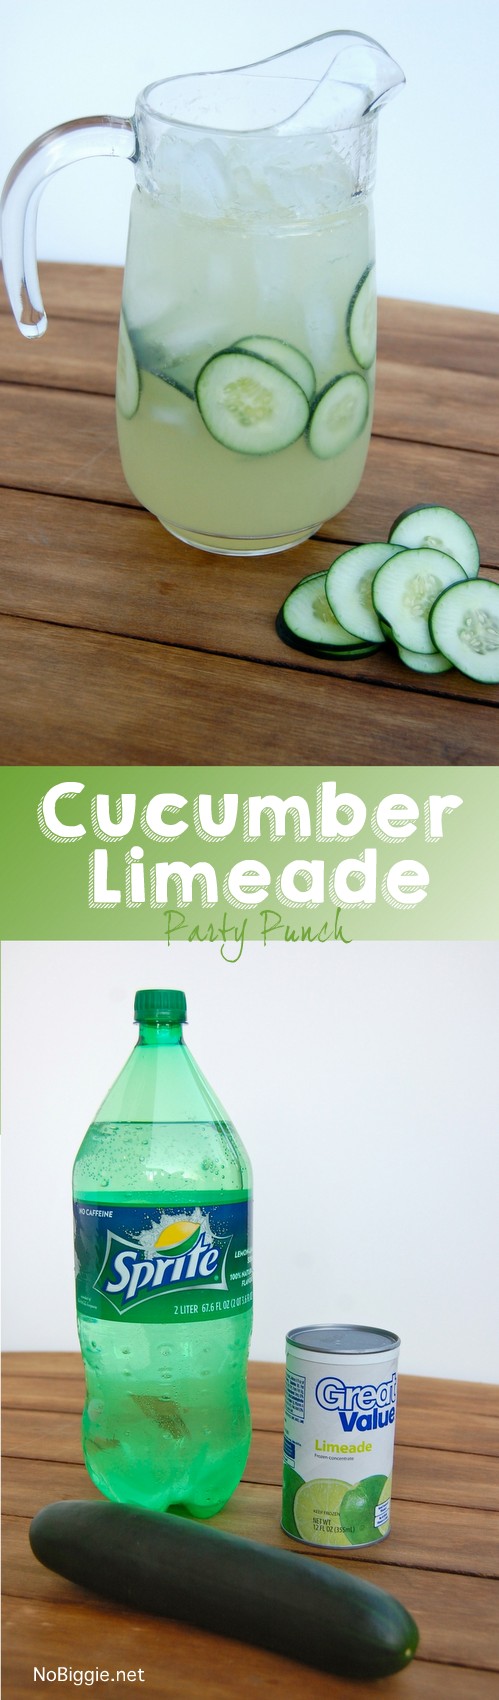 http://www.nobiggie.net/wp-content/uploads/2011/11/cucumber-limeade-party-punch-this-punch-is-so-easy-and-so-good-NoBiggie.net_.jpg